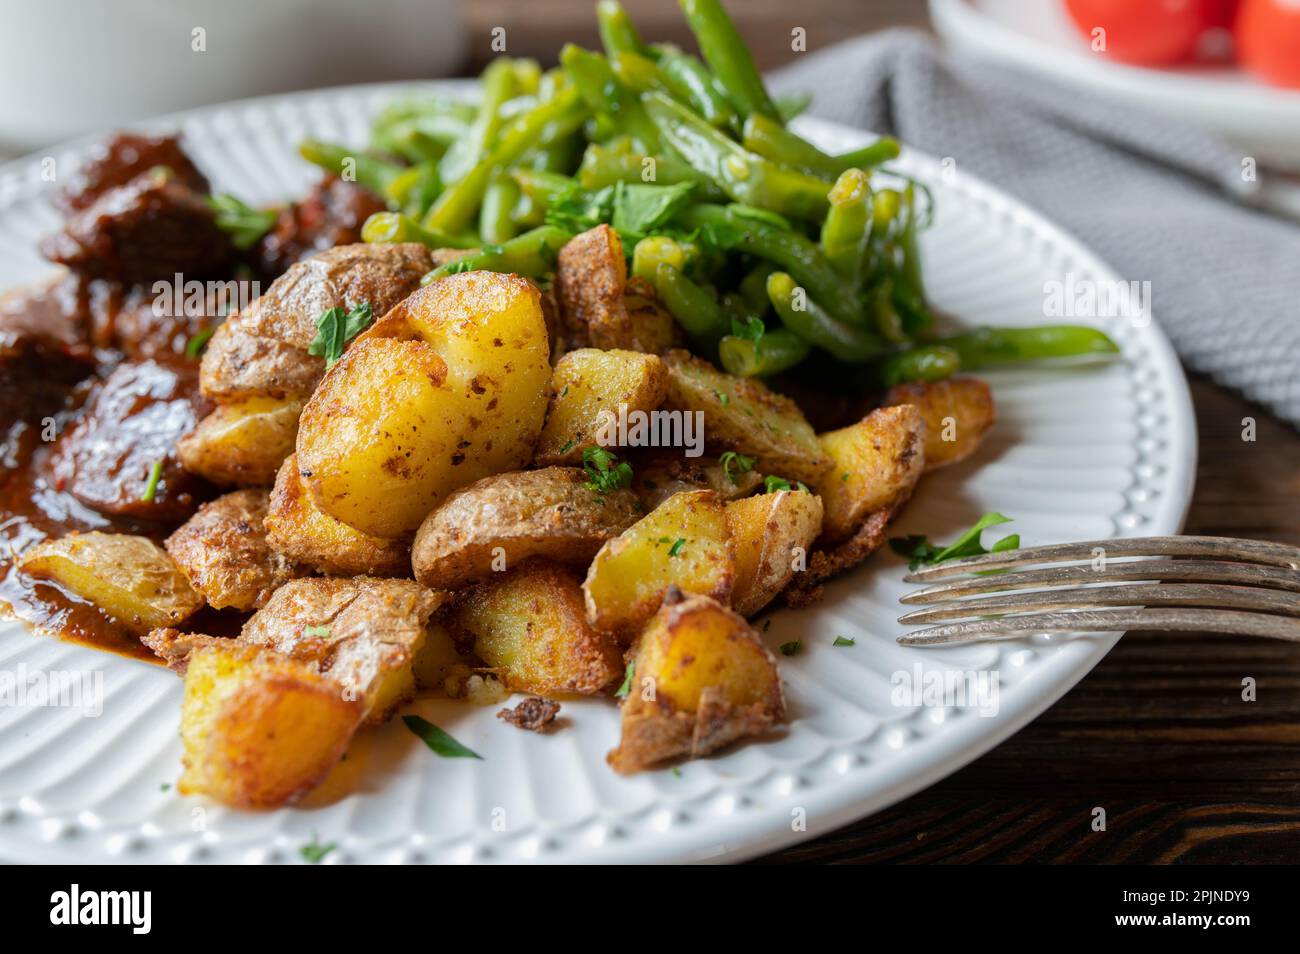 Pan fried potatoes on a dinner plate Stock Photo